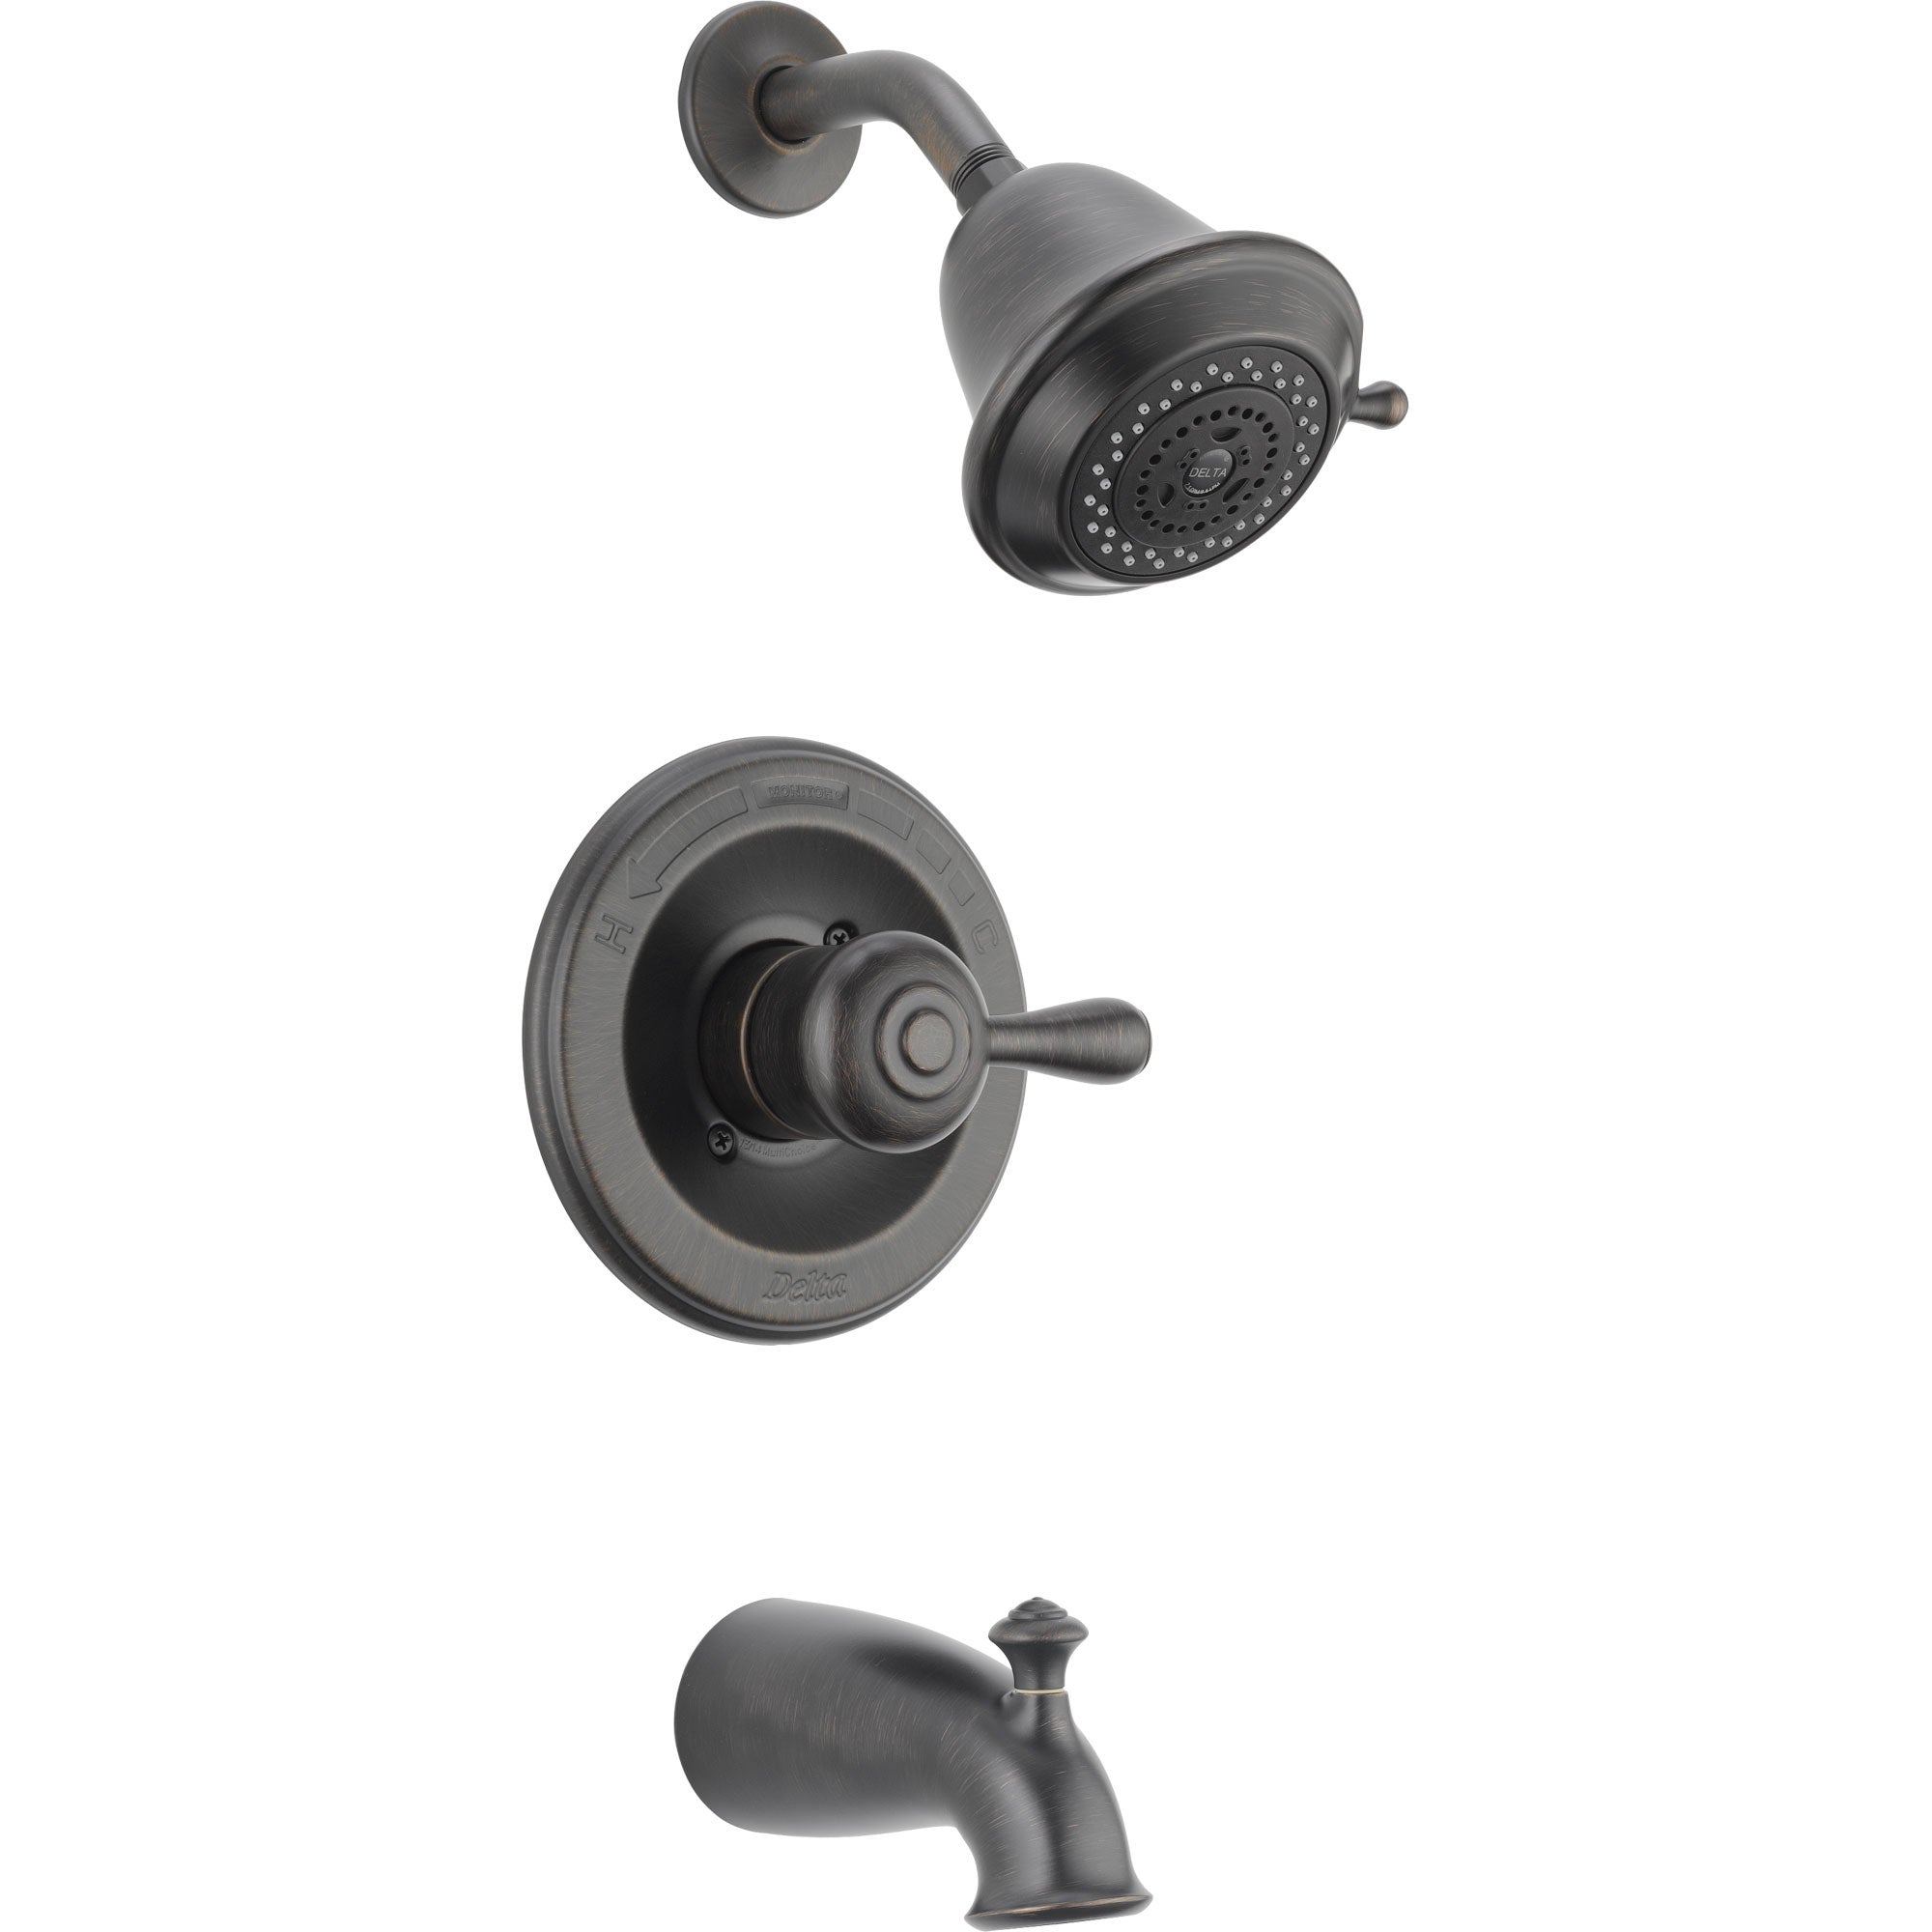 Delta Leland Monitor 14 Series Venetian Bronze Finish Single Lever Handle Tub and Shower Faucet Combo INCLUDES Rough-in Valve D1322V